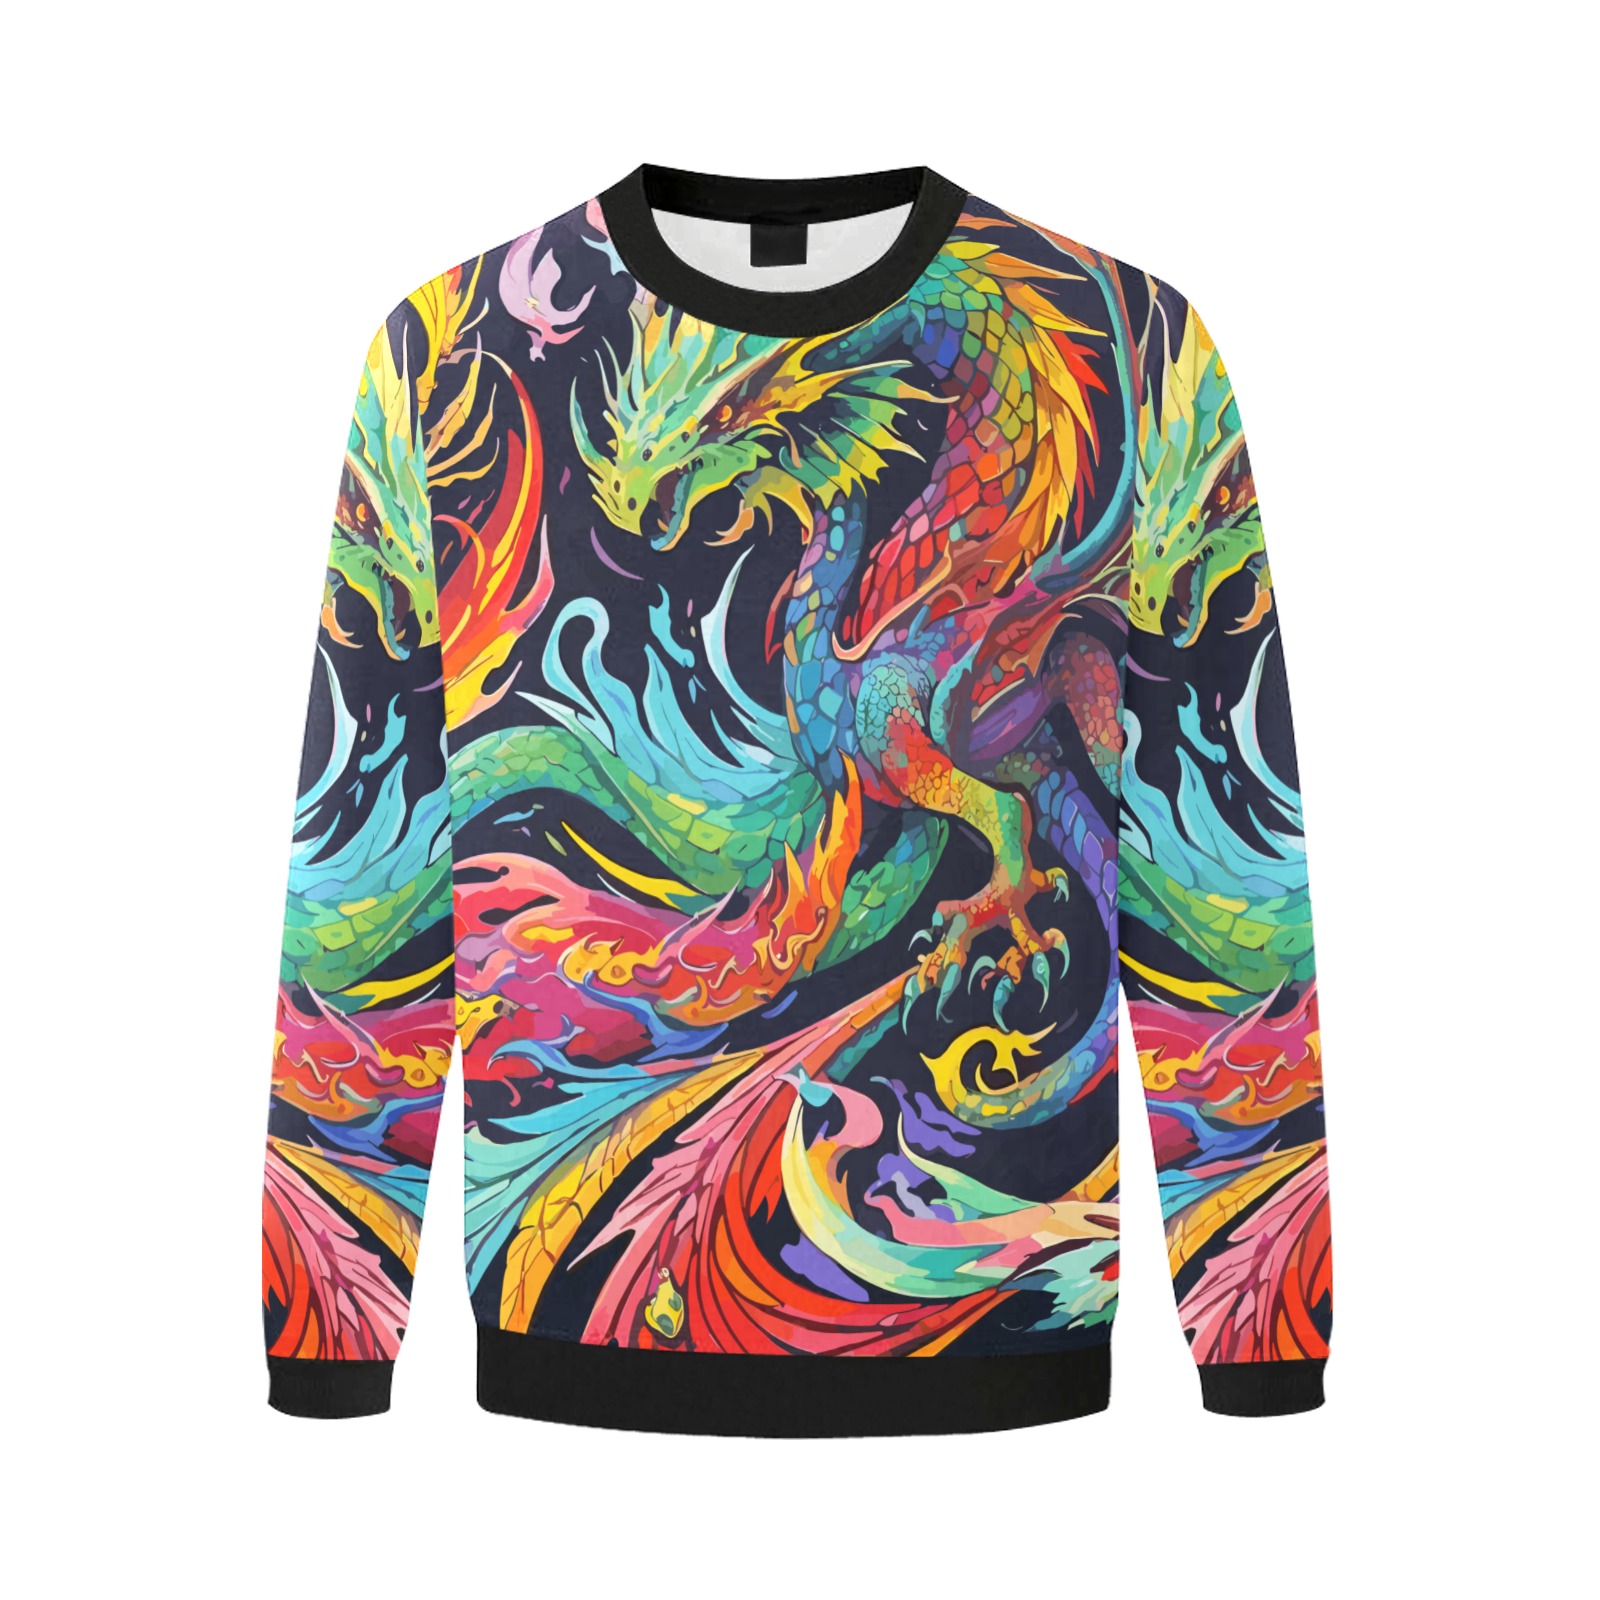 Awesome colorful abstract dragons, fire on black. Men's Oversized Fleece Crew Sweatshirt (Model H18)